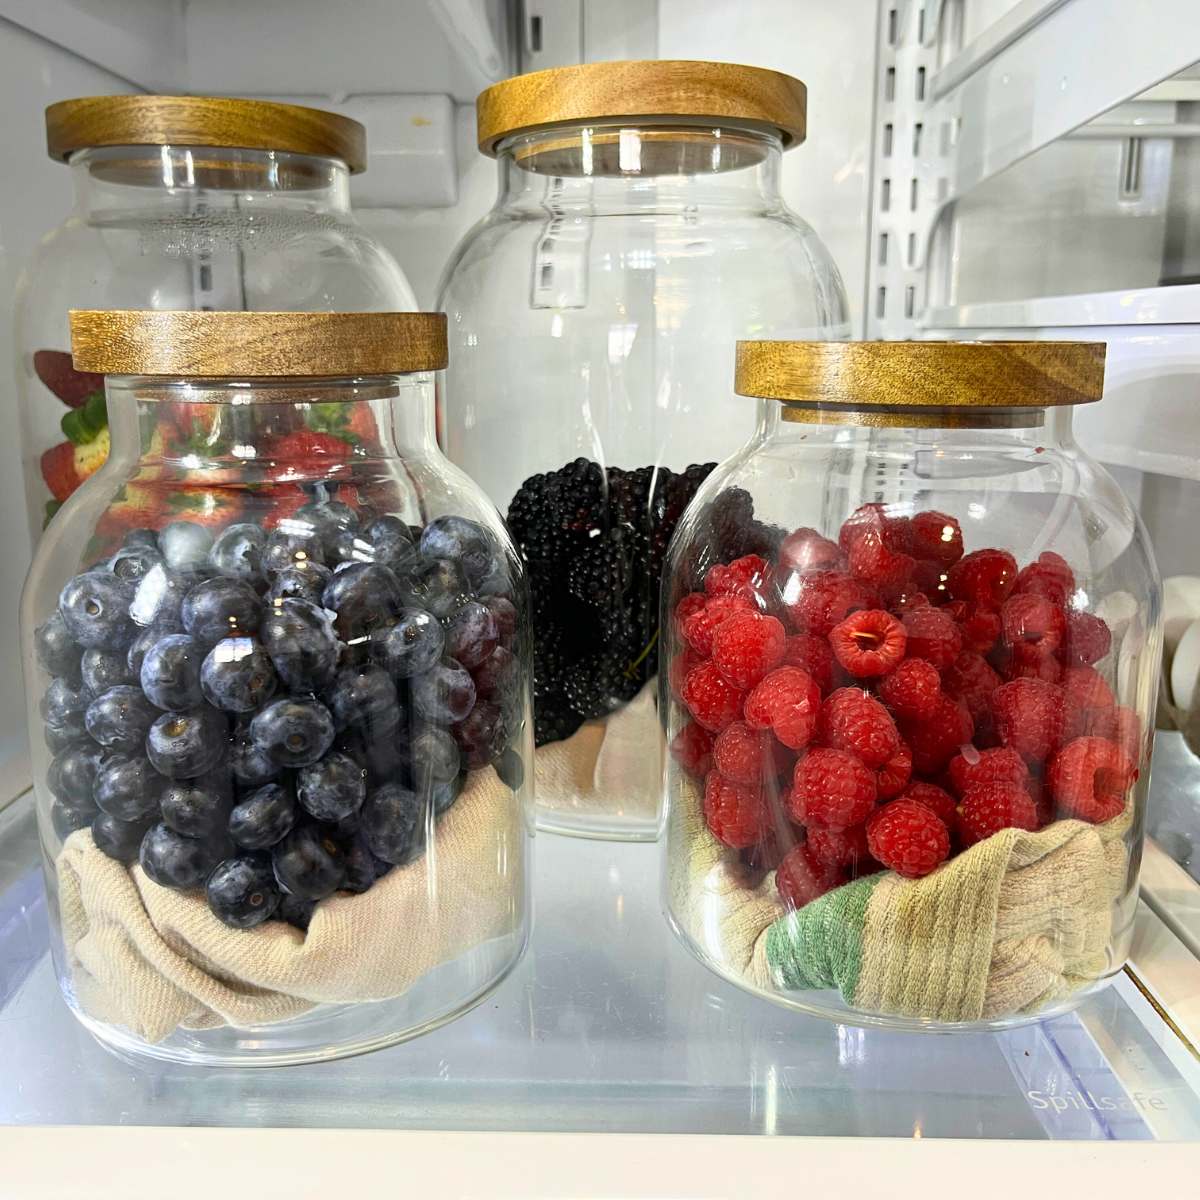 Four glass jars with wooden lids full of berries. They all have a kitchen towel in the bottom.